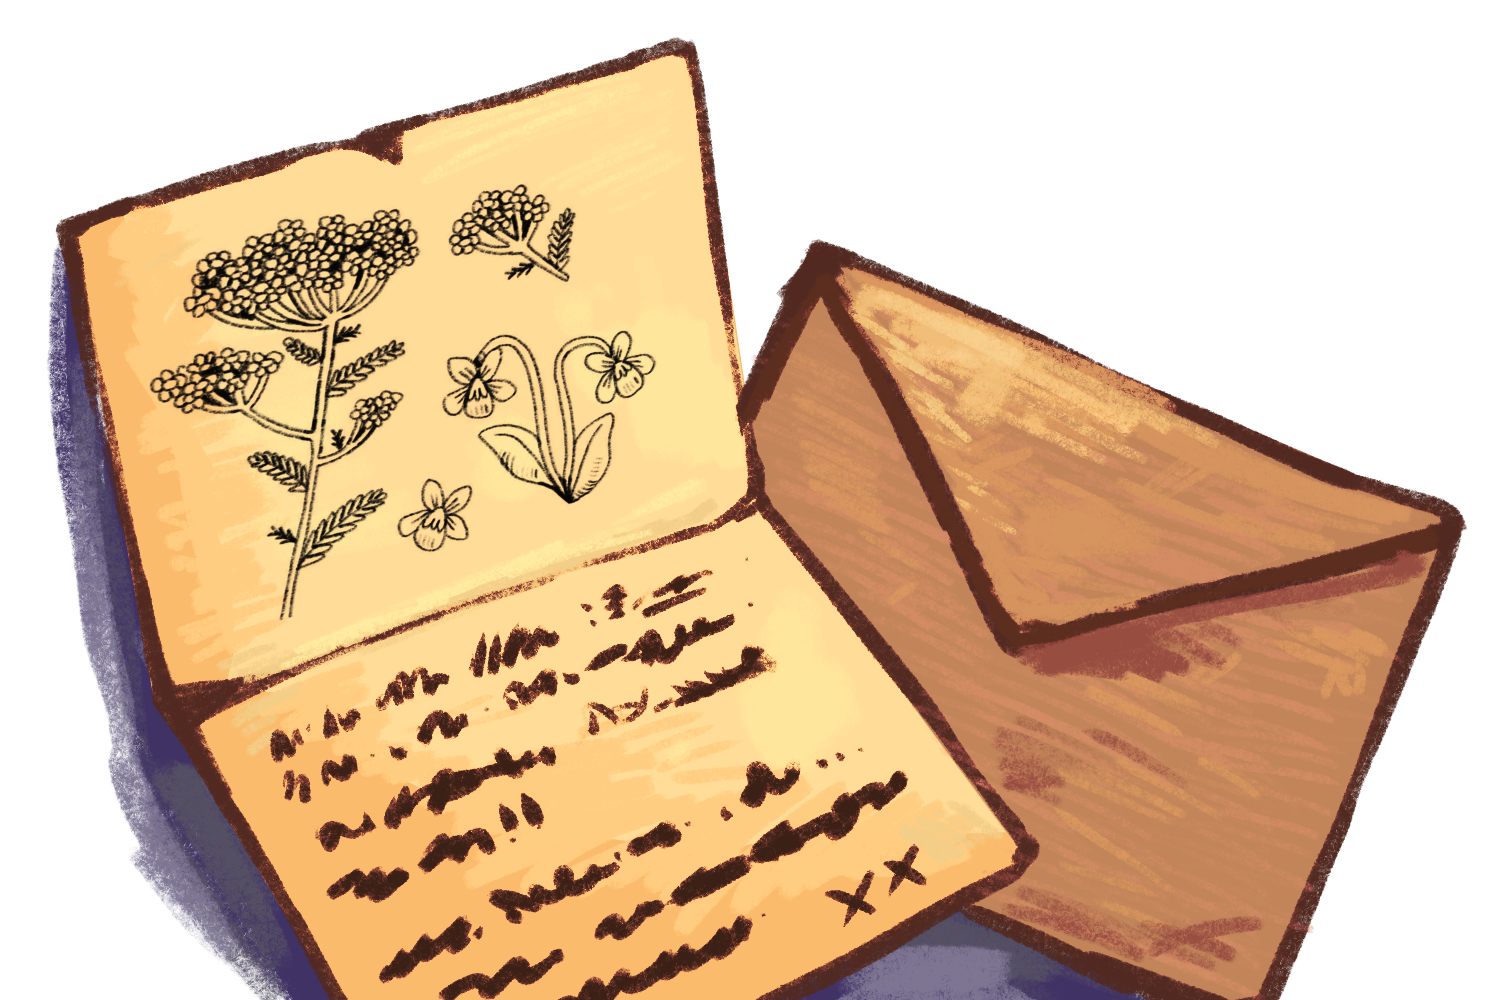 Image. A drawing of an open letter laid on a closed envelope. The letter has an illustration of some flowers.